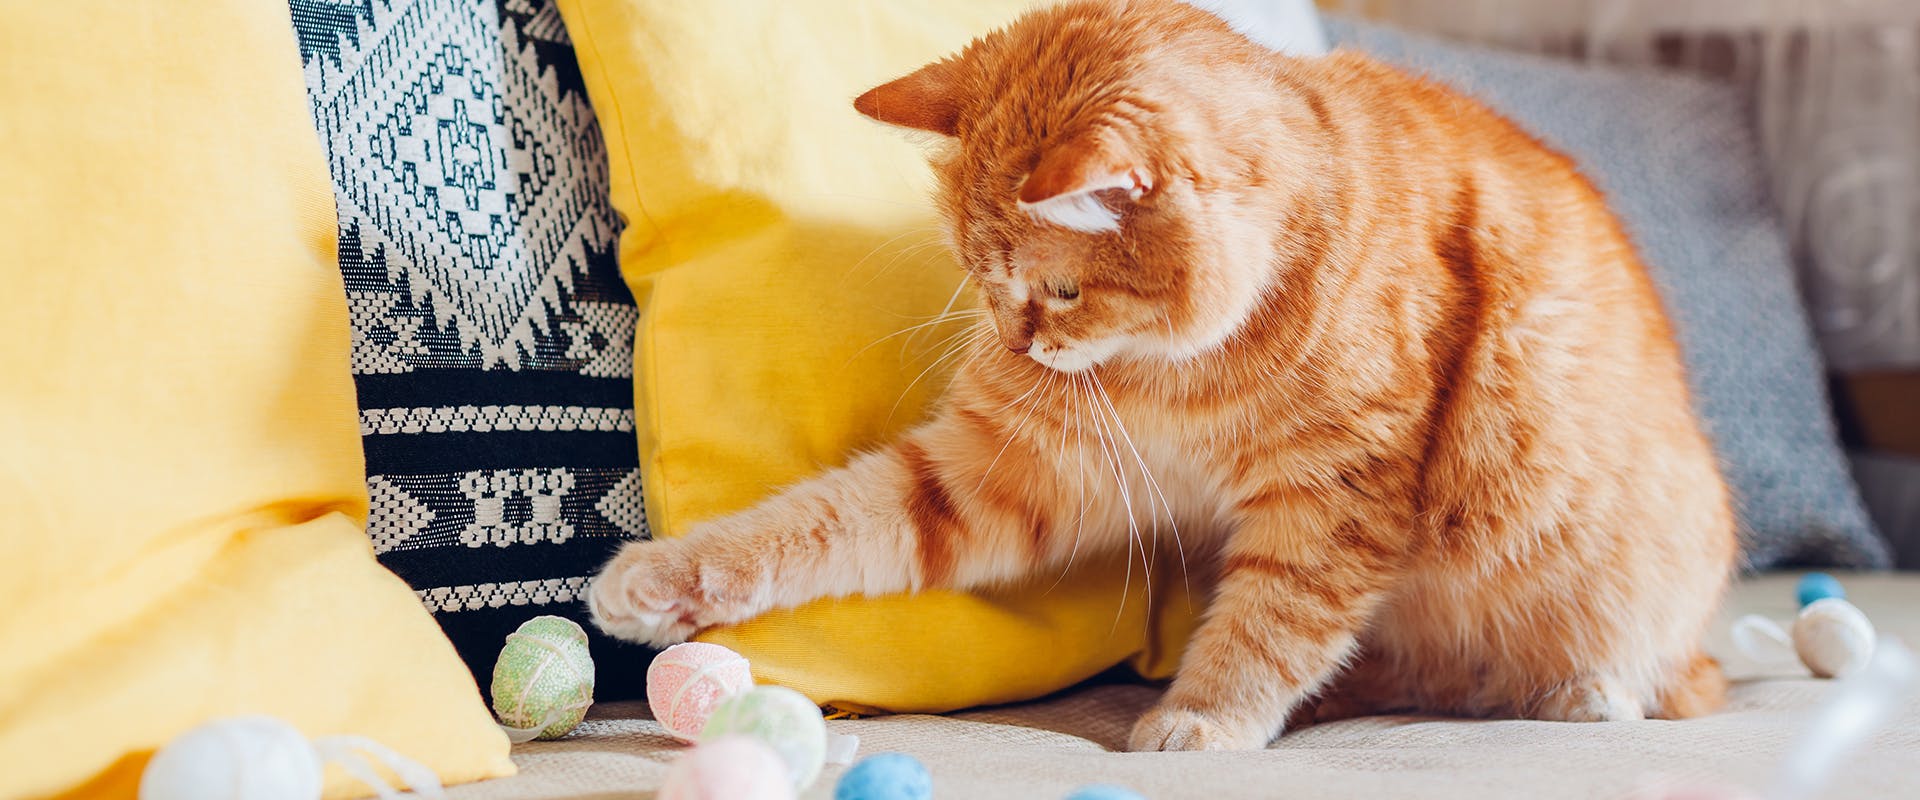 A ginger cat pawing at some Easter egg decorations